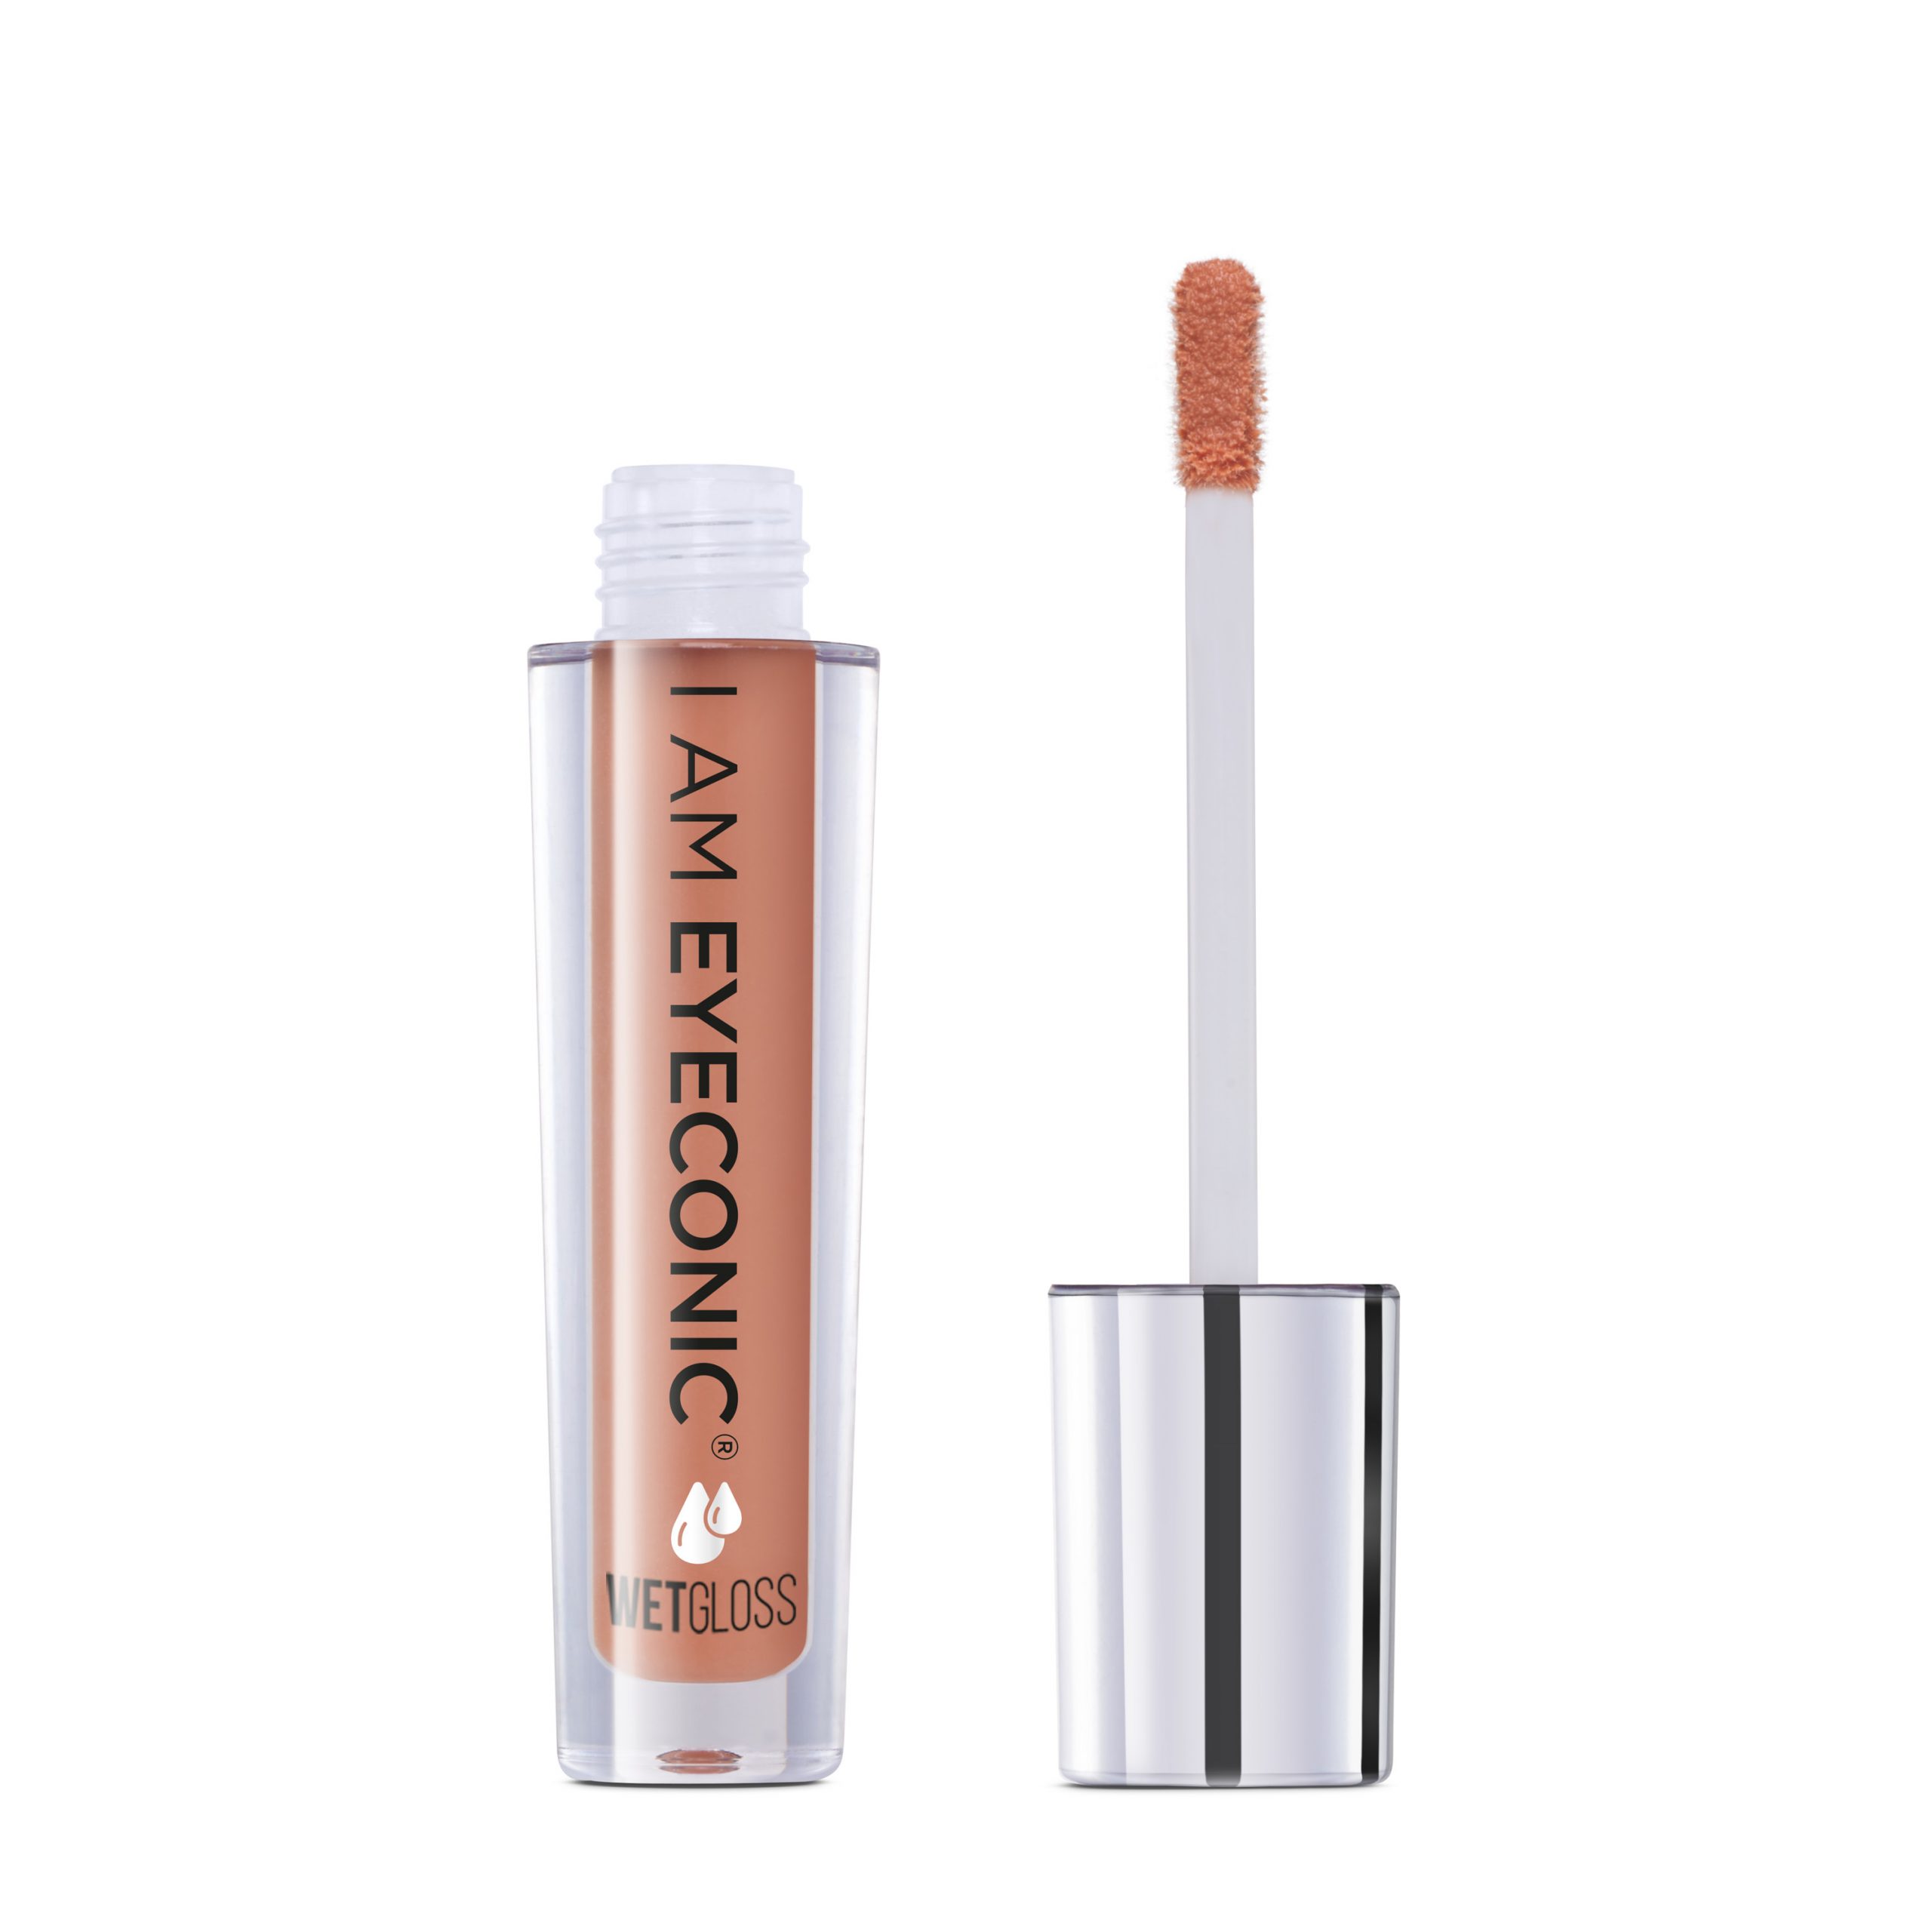 Packshot image of Eyeconic Beauty Lip Gloss product on white background by photographer Ian Knaggs